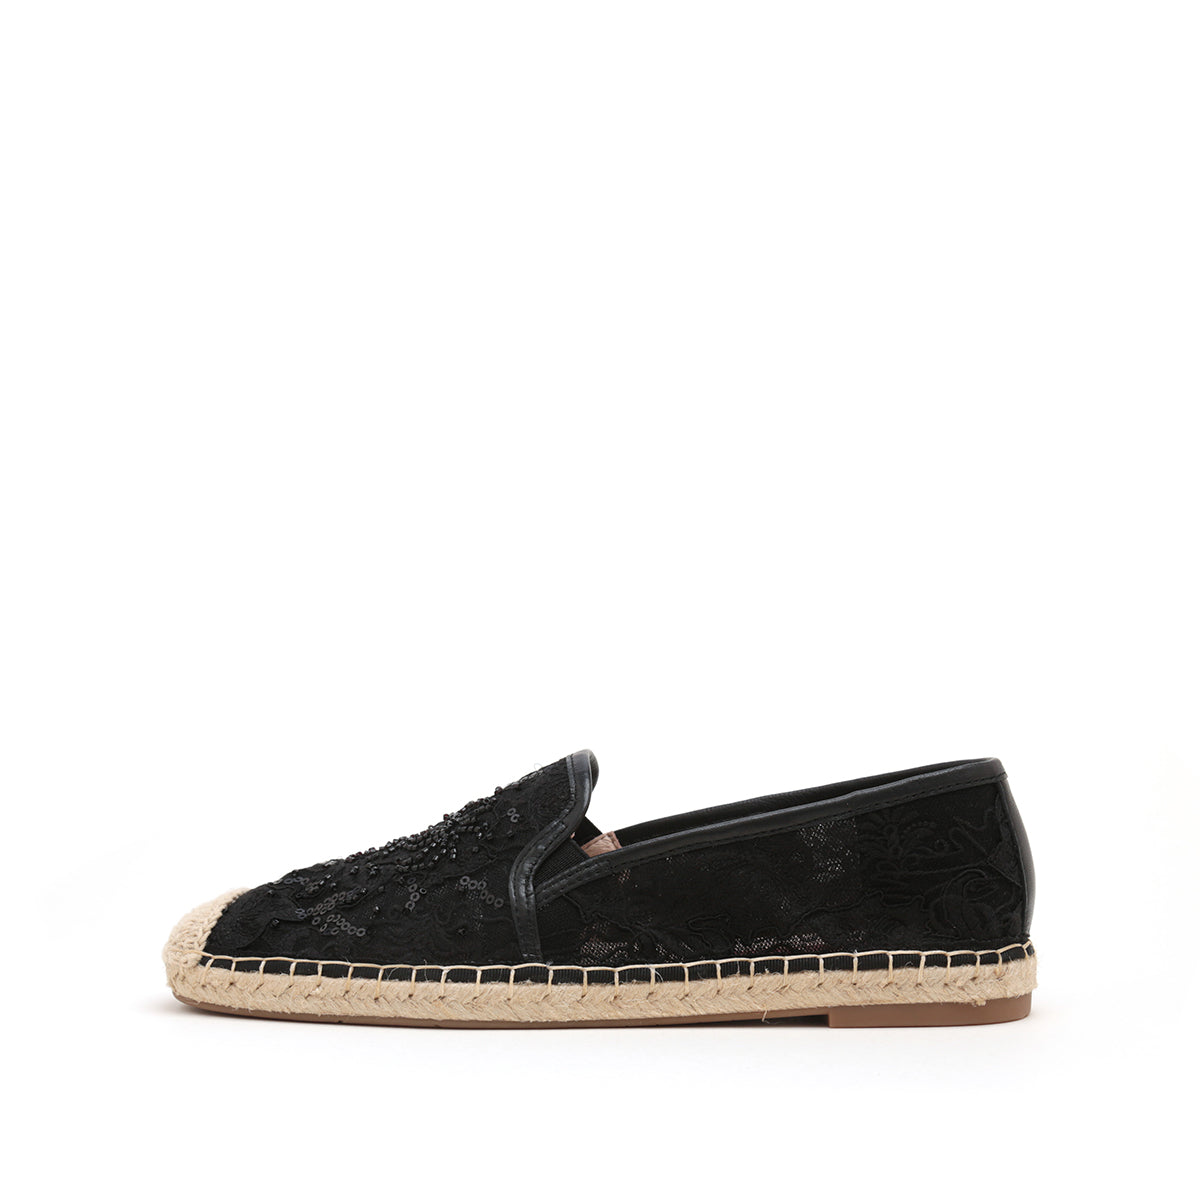 Beaded Lace Espadrilles